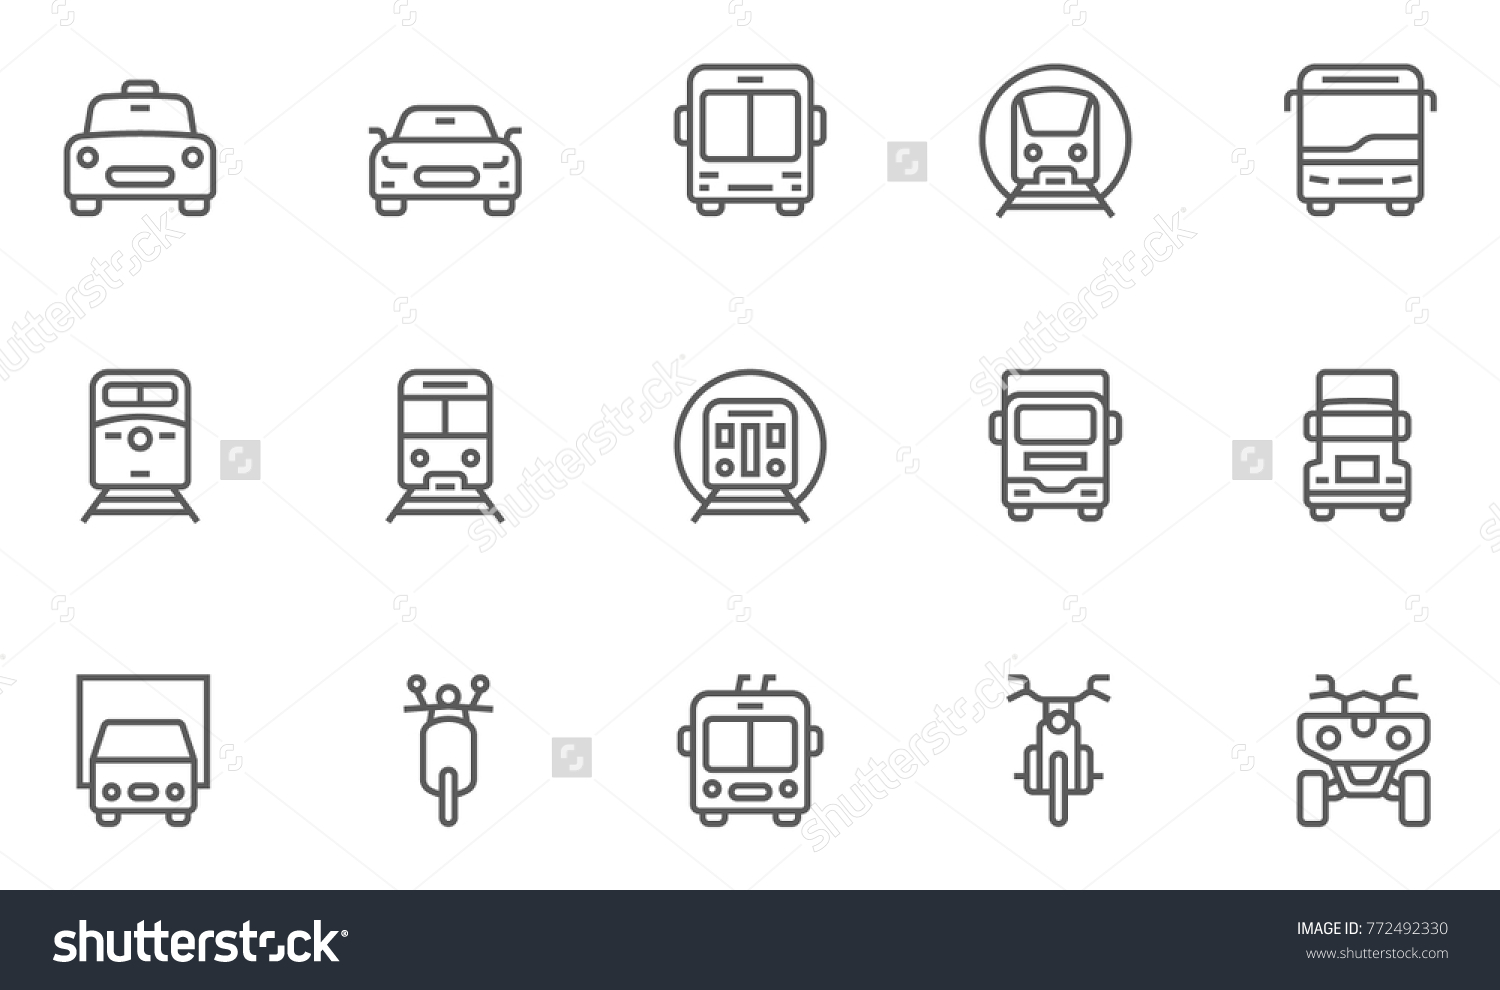 SVG of Set of Front View Transport Vector Line Icons. Editable Stroke. 48x48 Pixel Perfect. svg